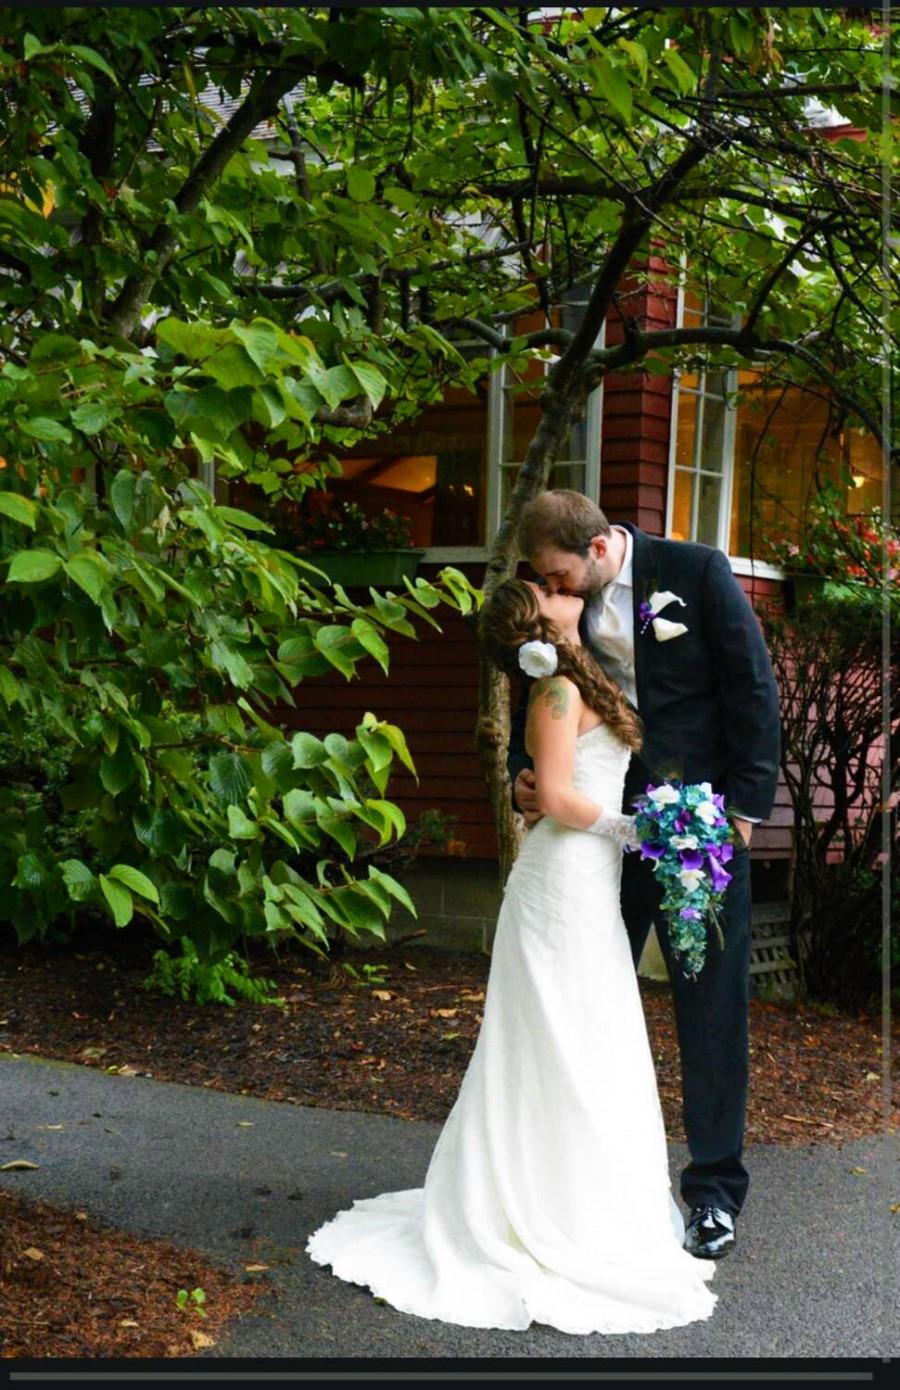 Wedding - Cascading bridal bouquet with teal hydrangeas, purple calla lilies and white orchids, peacock feather accent